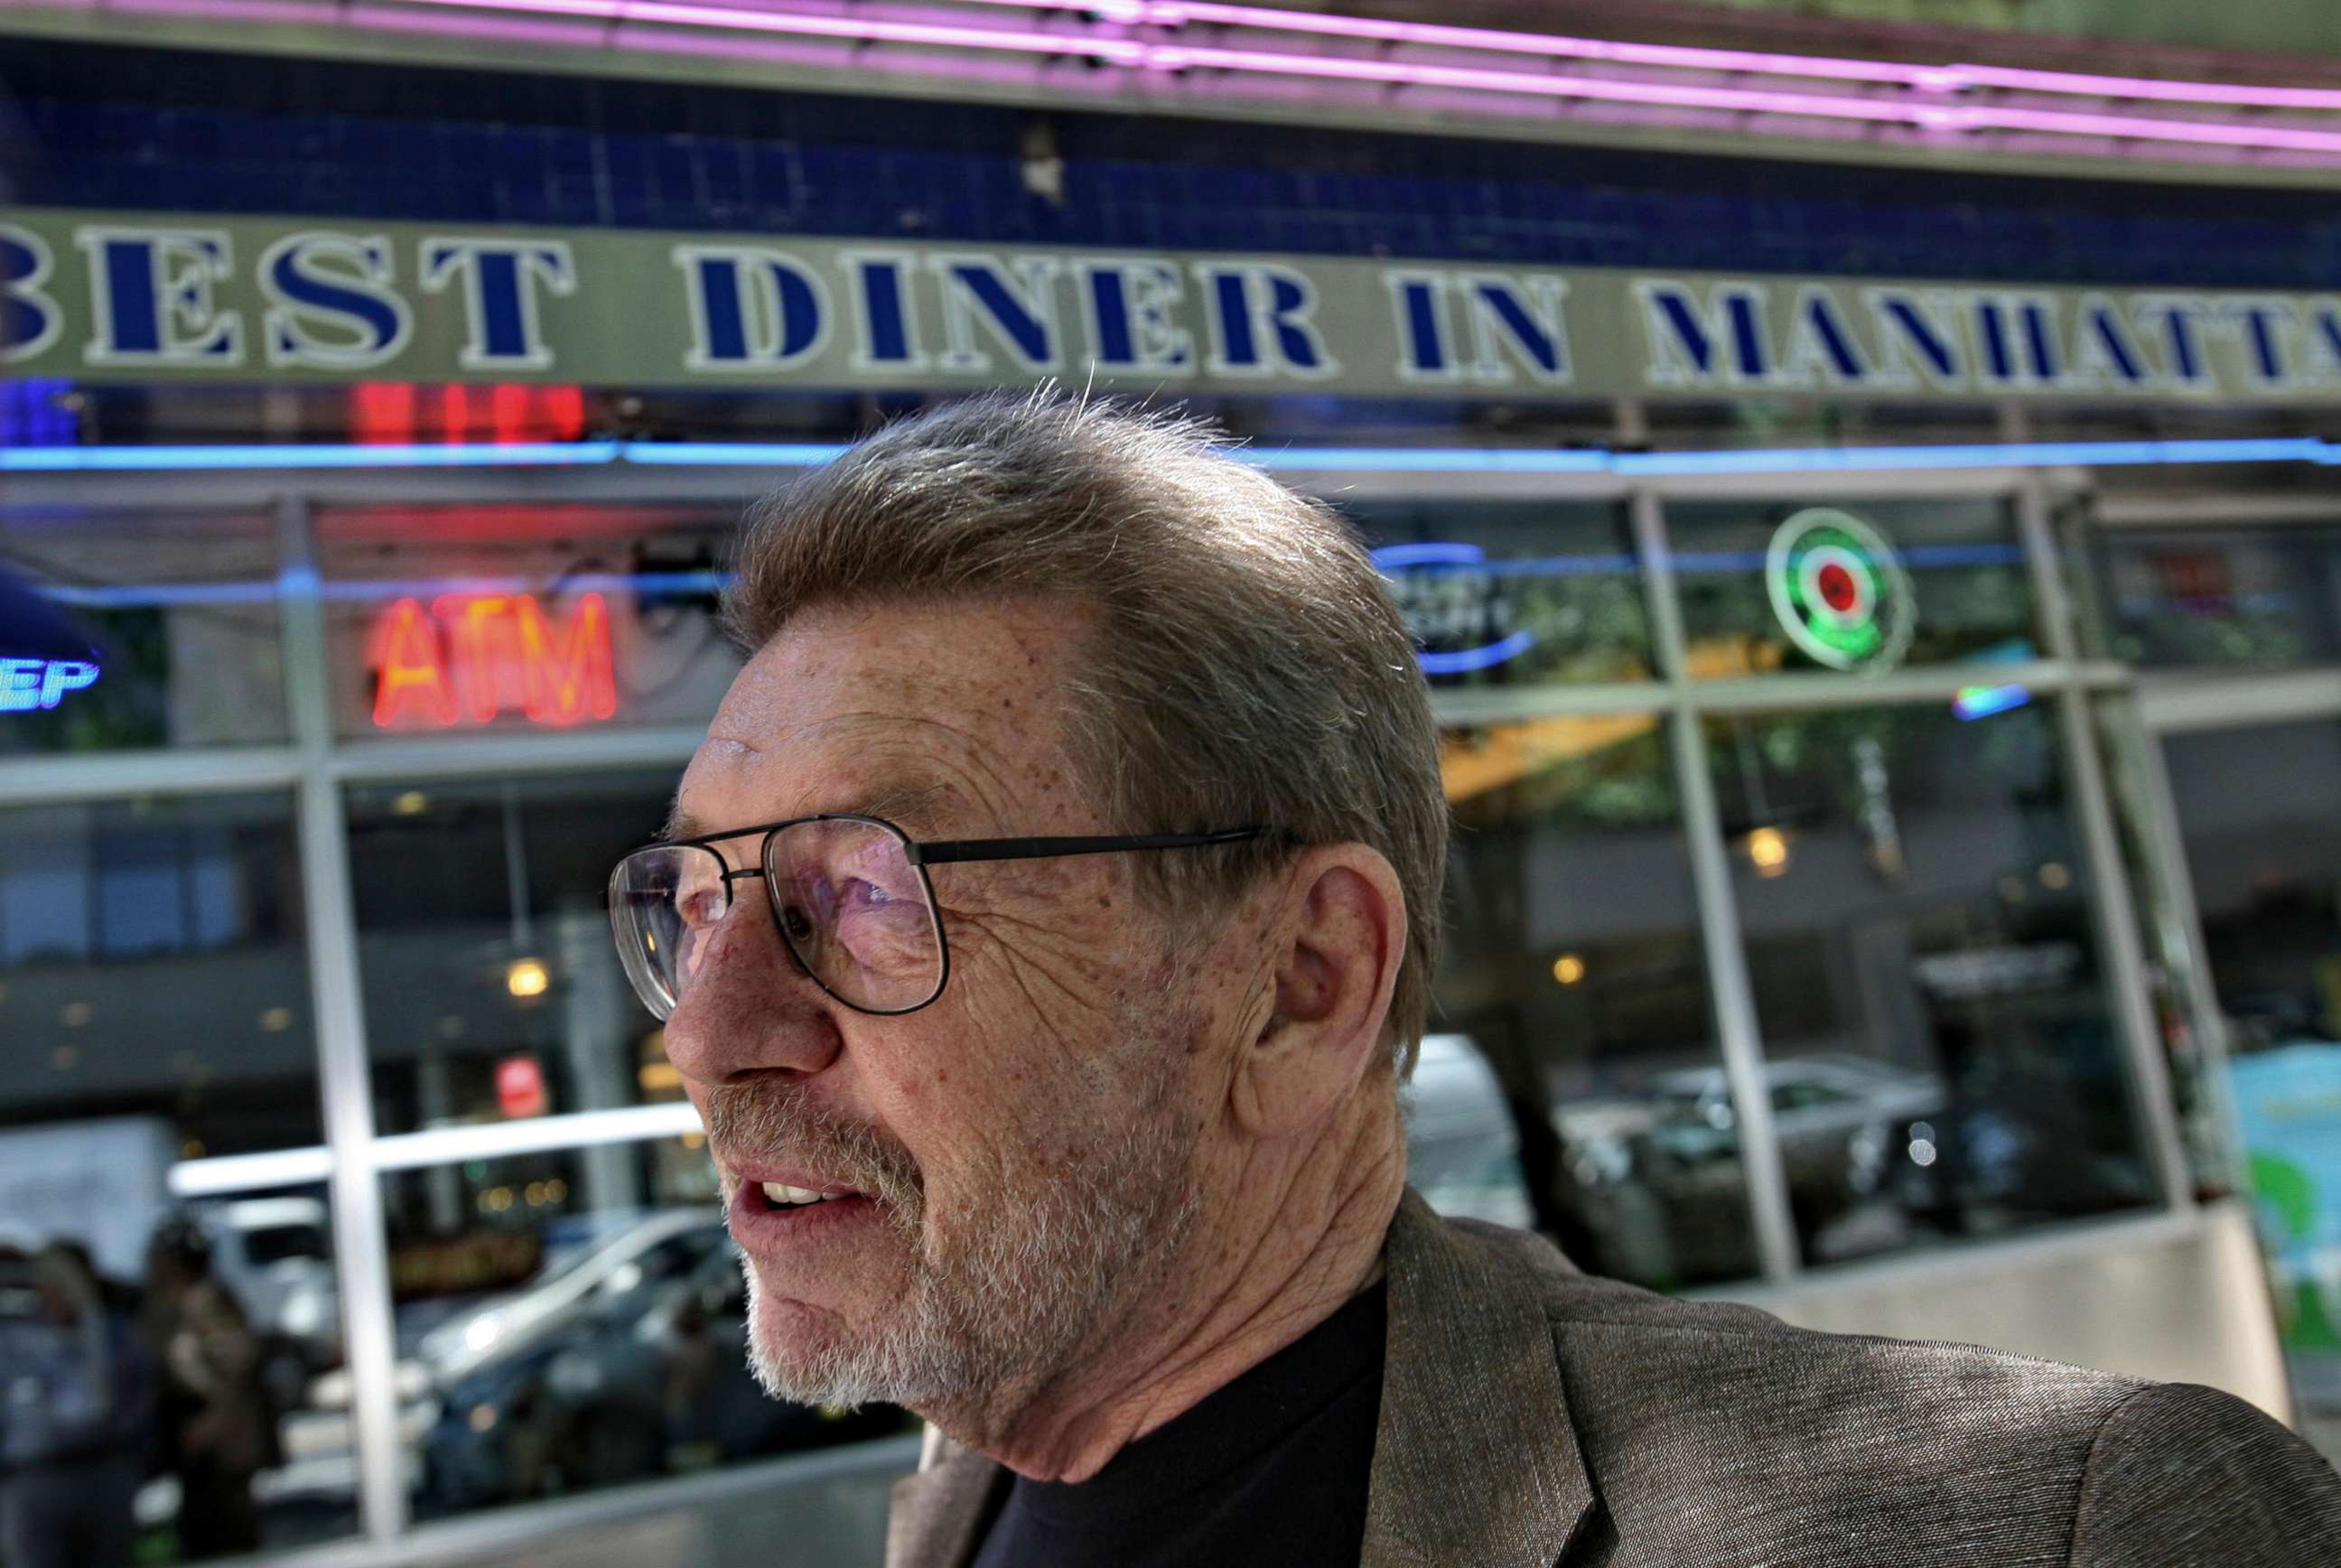 PHOTO: In this June 5, 2007, file photo, Pete Hamill responds during an interview at the Skylight Diner in New York.